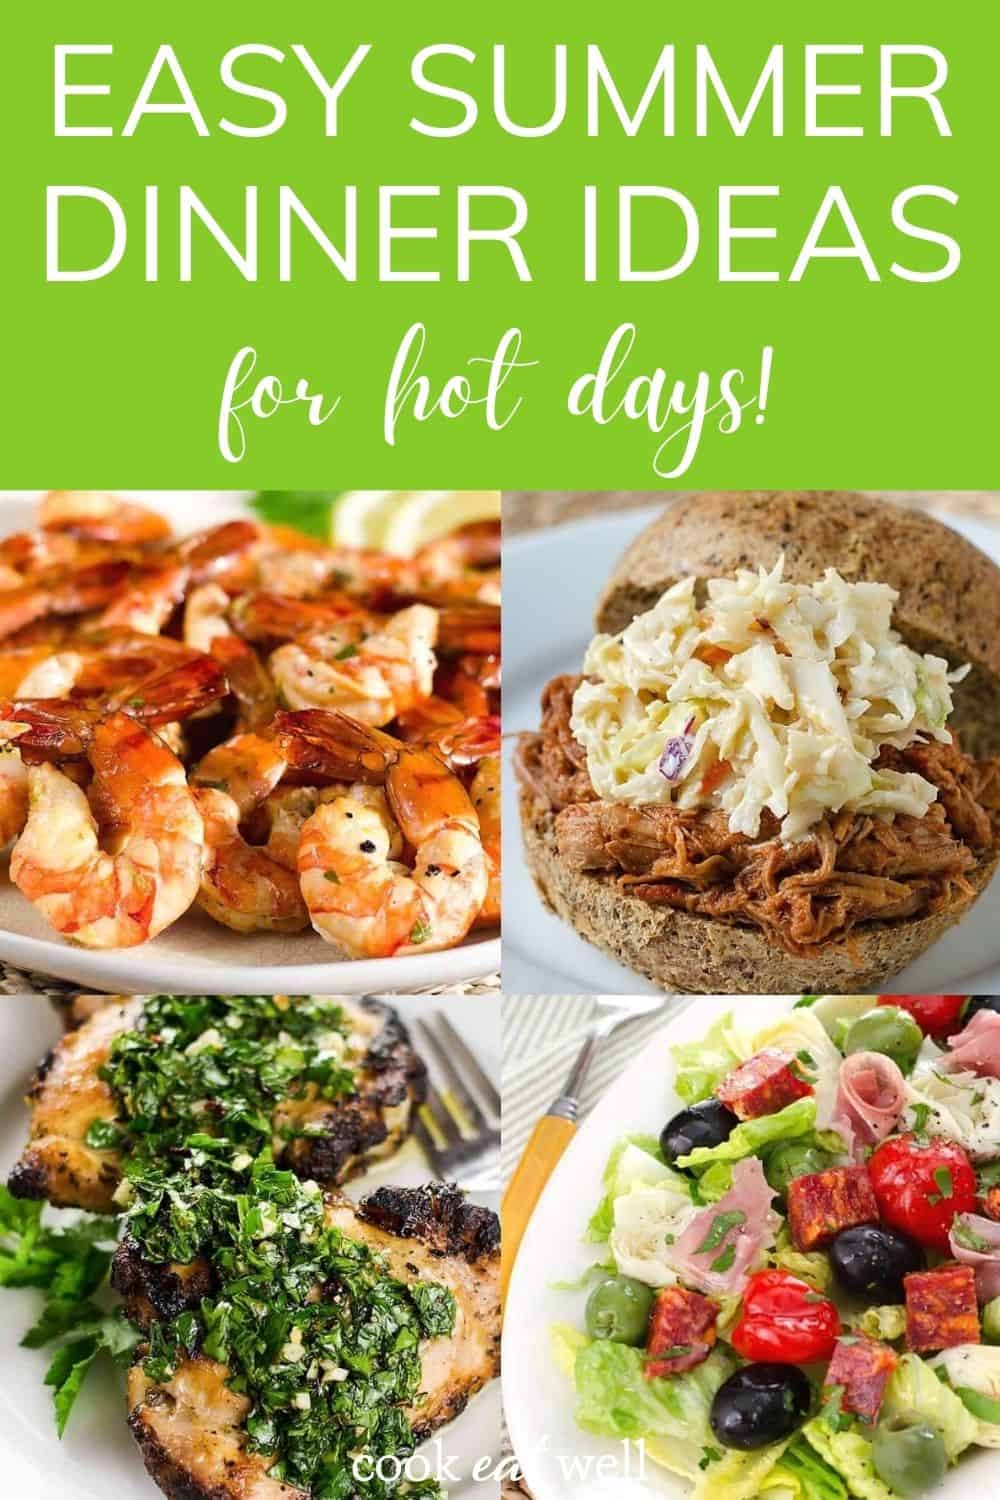 Easy Healthy Summer Dinner Ideas For Hot Days - Cook Eat Well